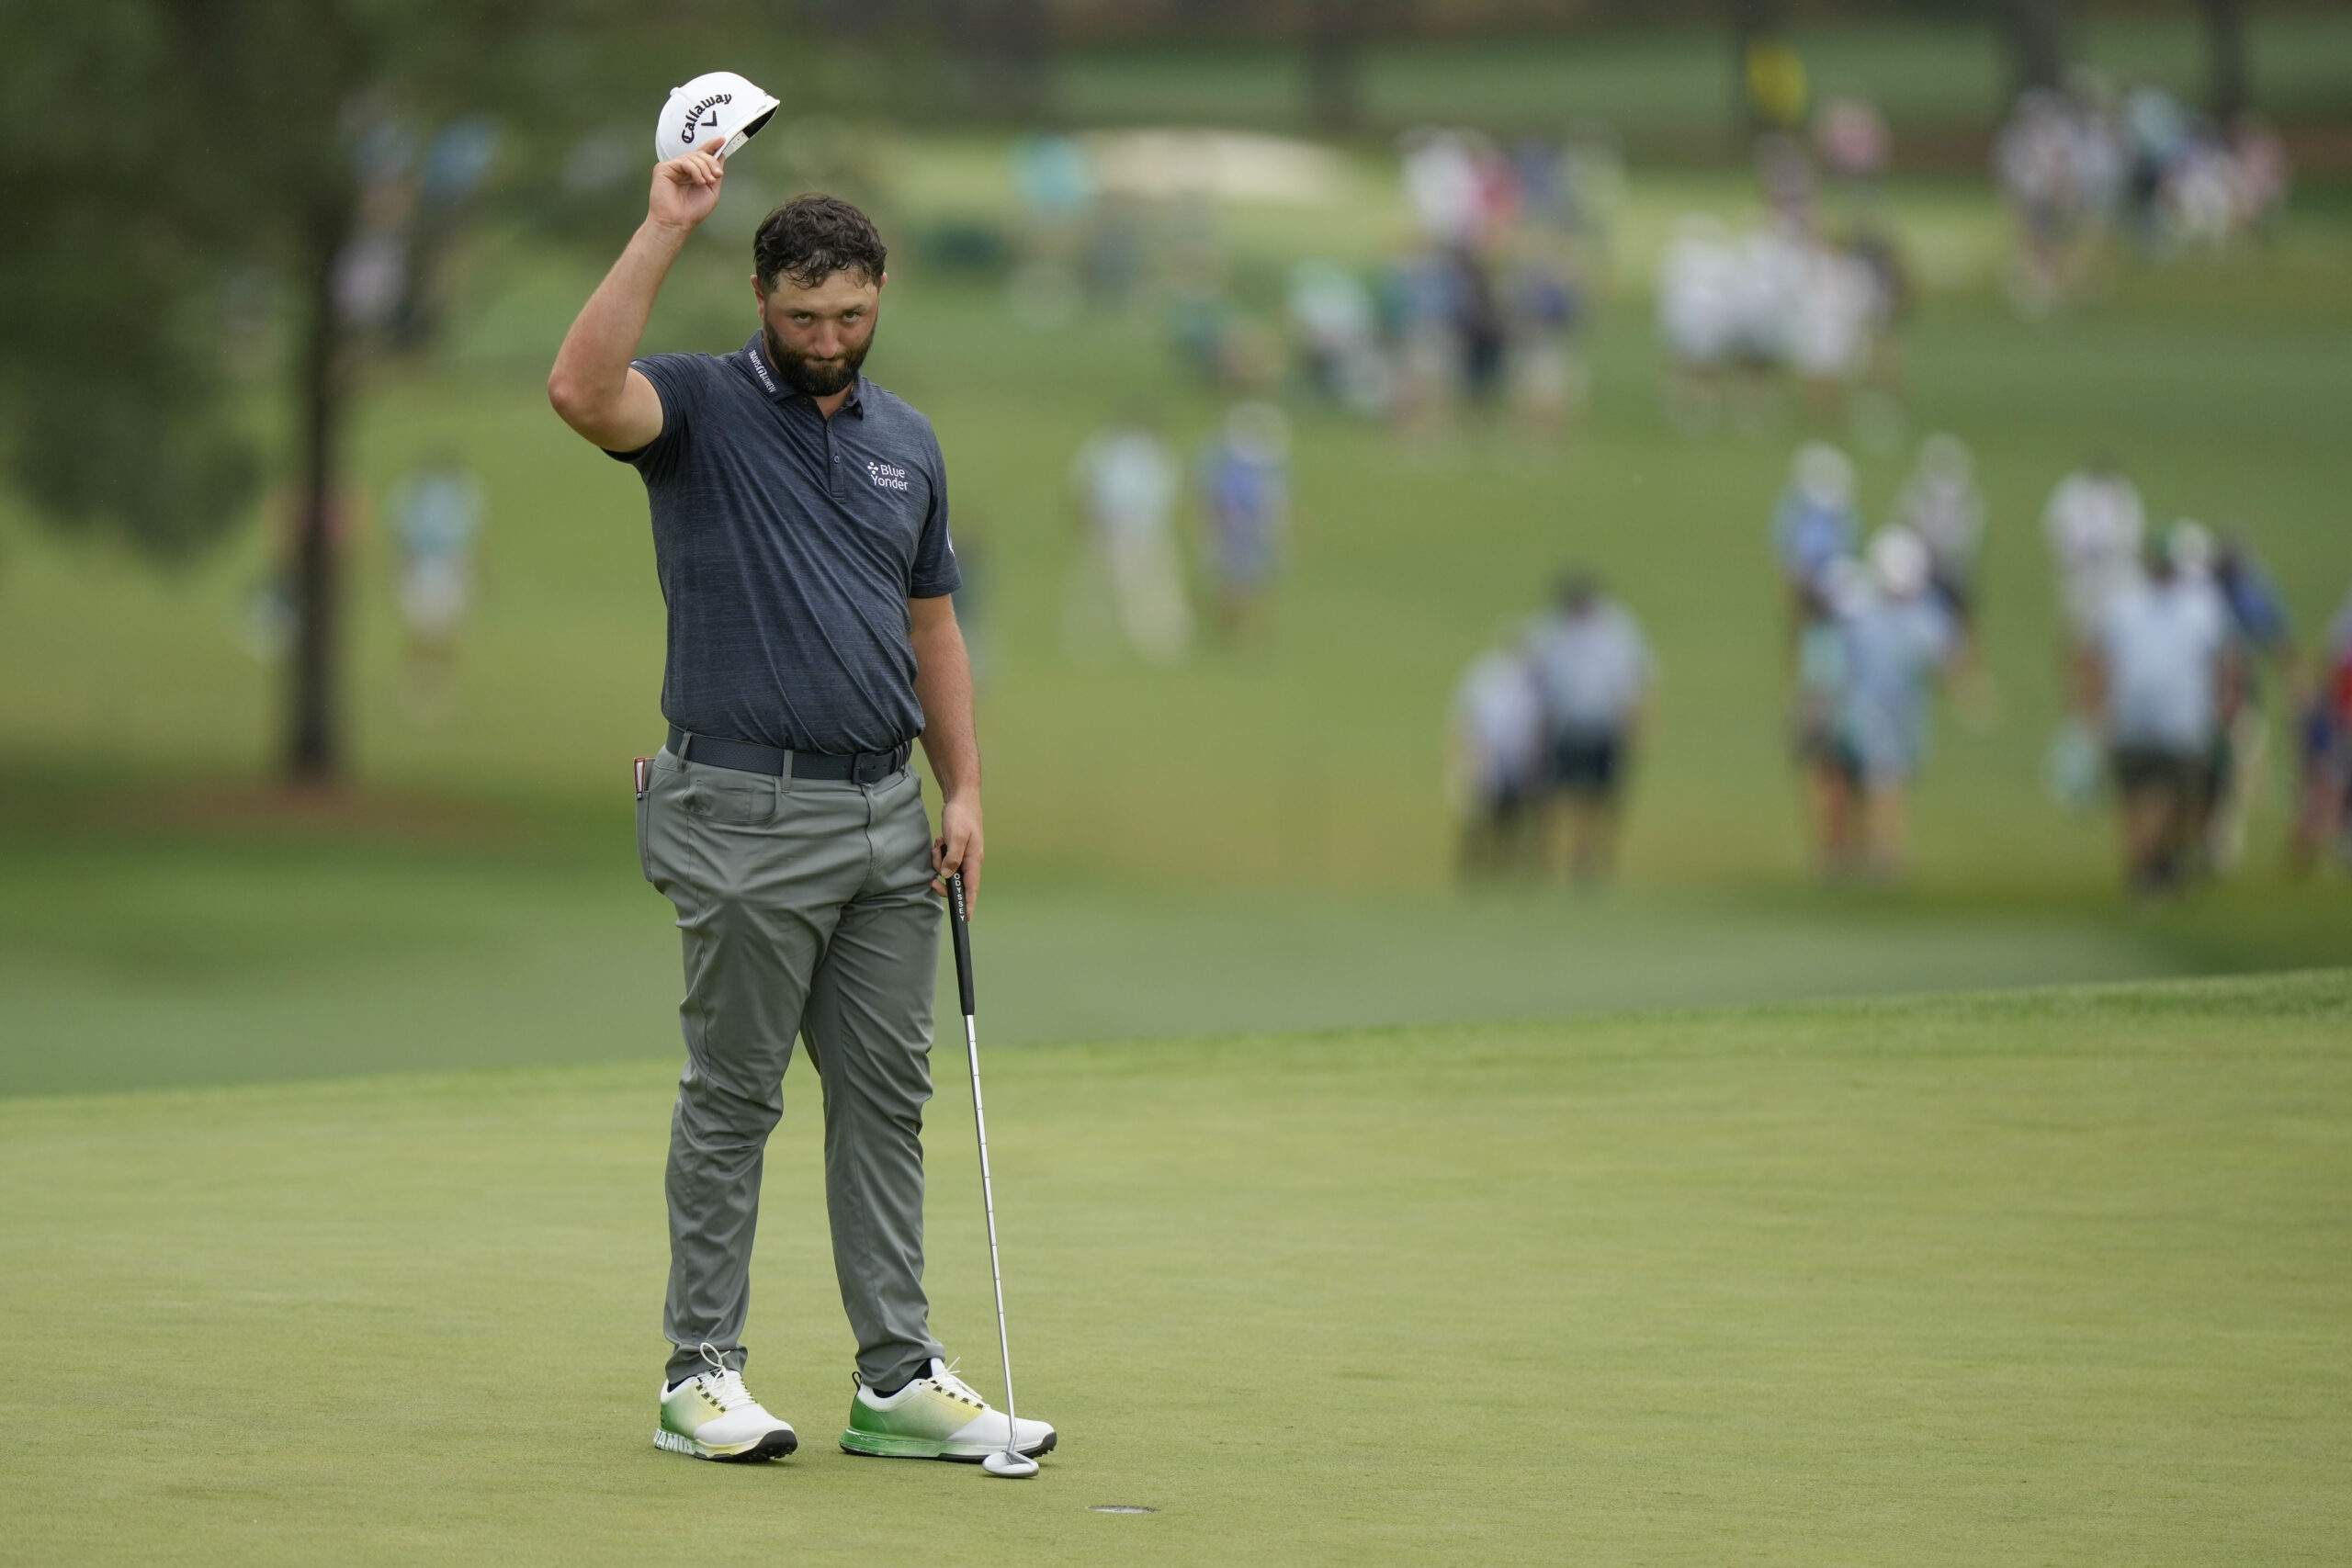 Jon Rahm, of Spain, waves after his putt on the 18th hole during the first round of the Masters gol...